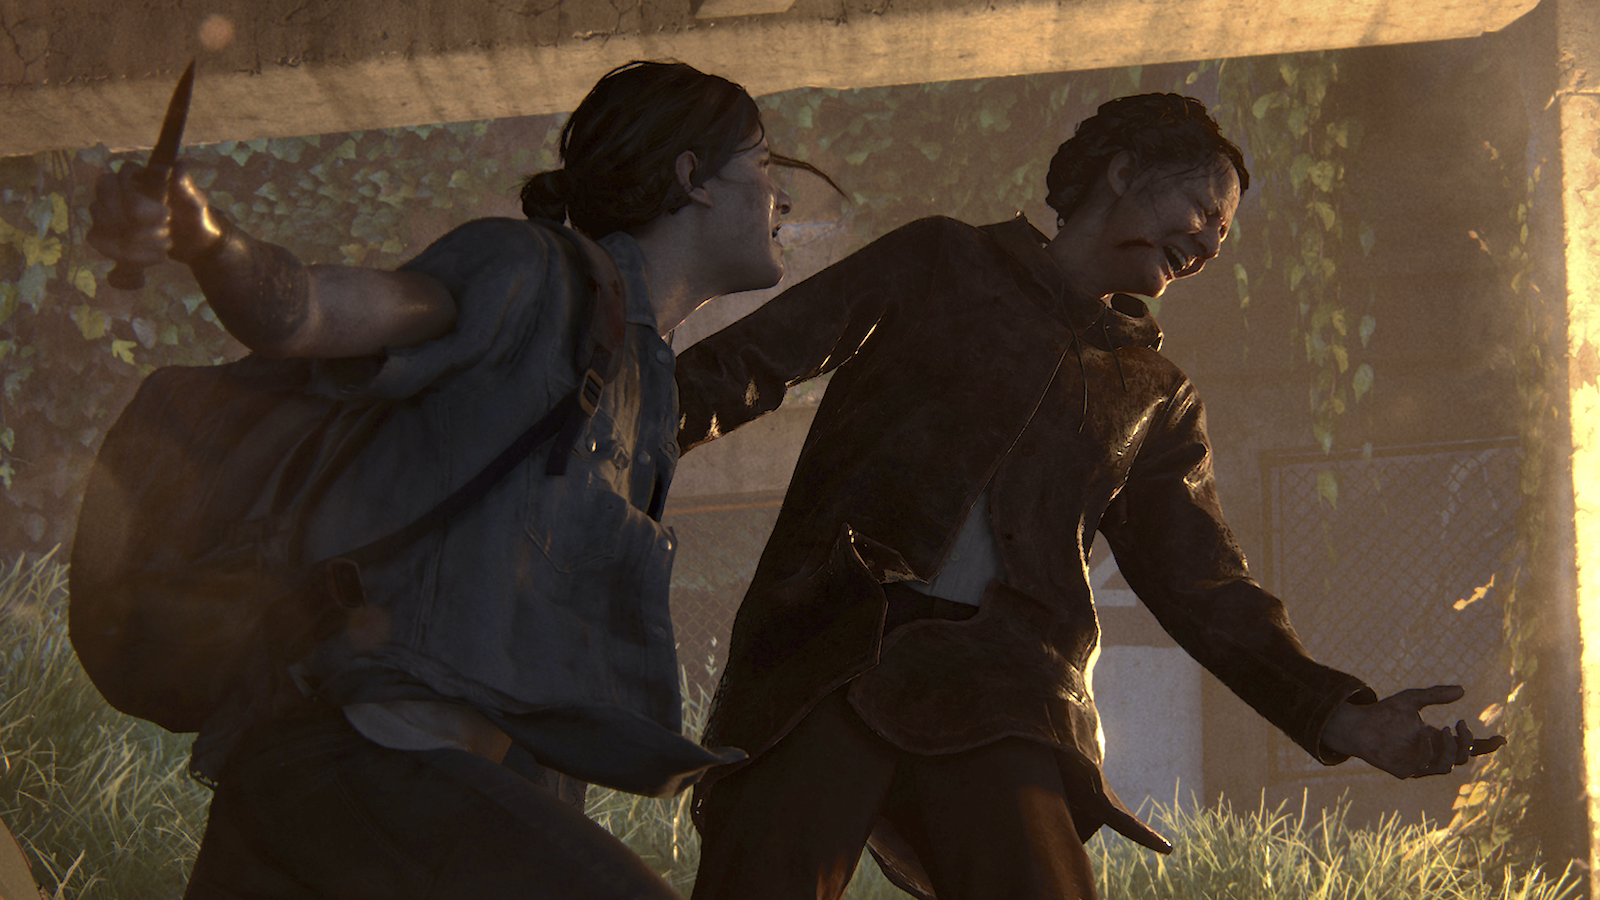 The Last of Us' video game undeterred by real-world violence - Victoria  Times Colonist